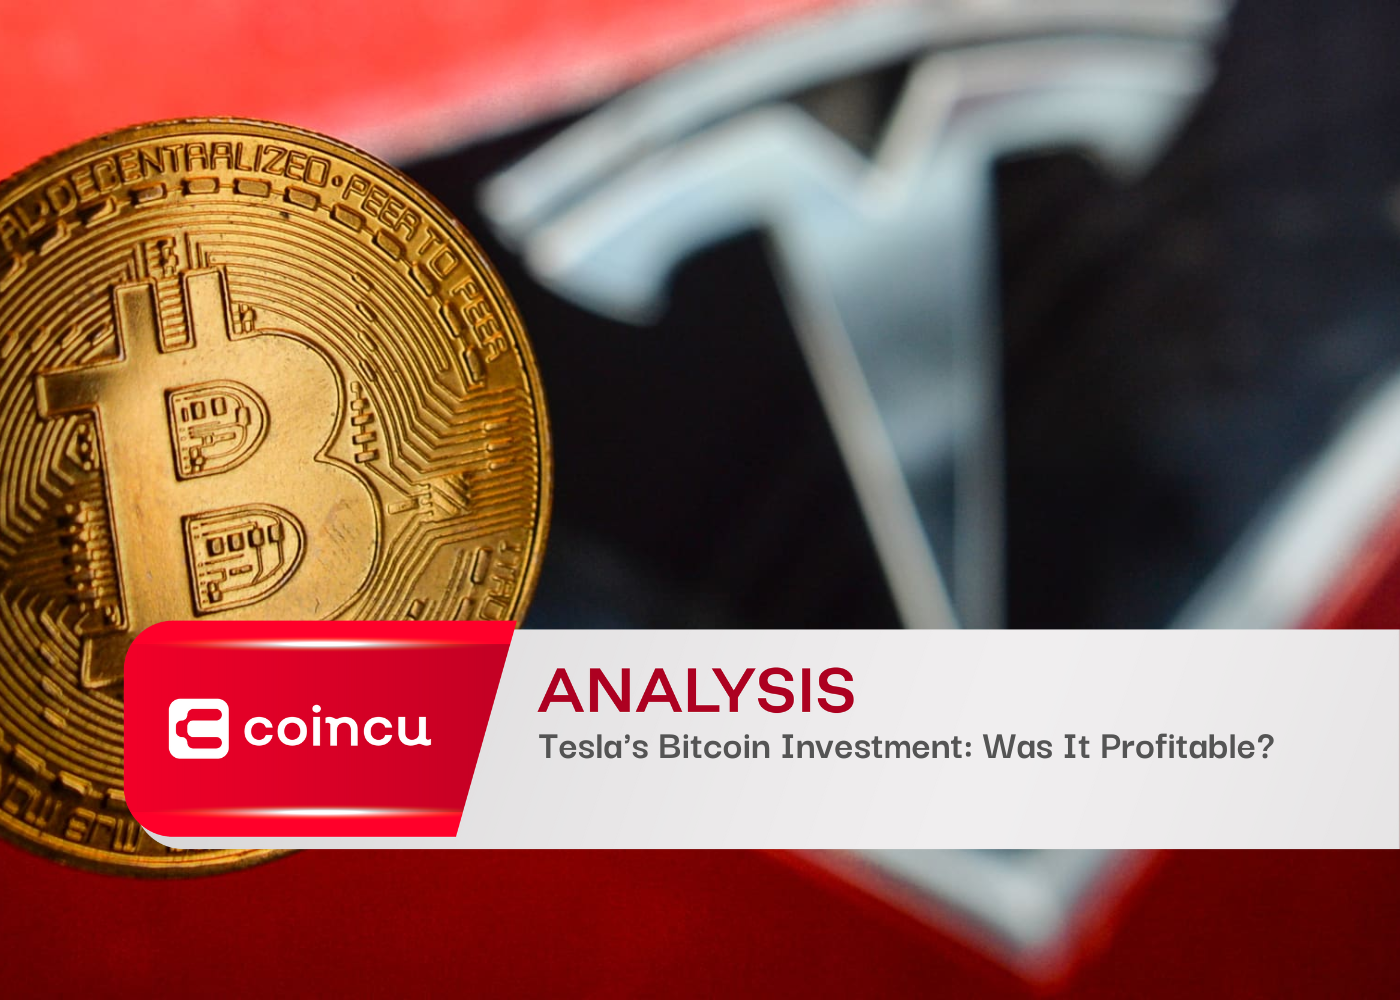 Tesla's Bitcoin Investment: Was It Profitable?